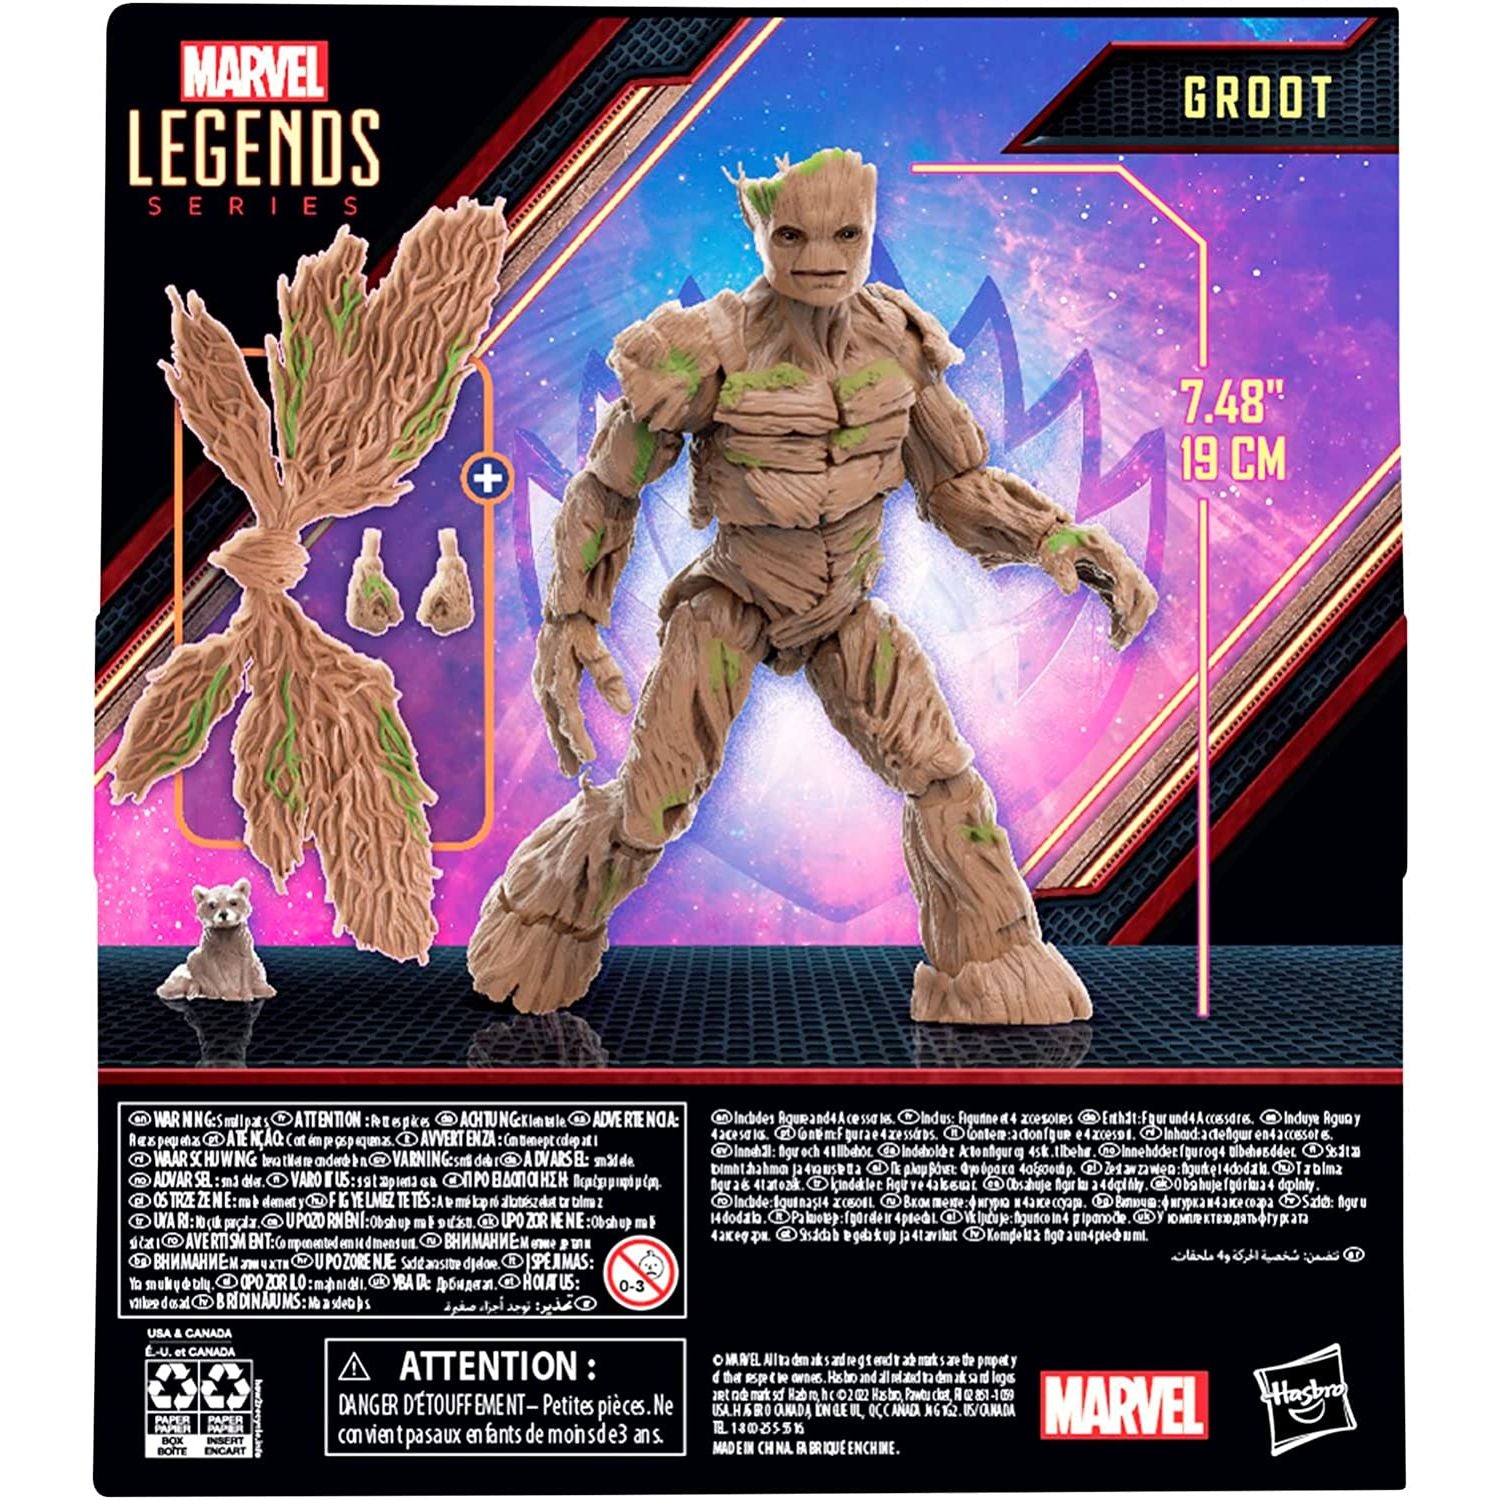 Guardians of the Galaxy Vol. 3 Marvel Legends Groot 6-Inch Action Figure Box Back View - Heretoserveyou